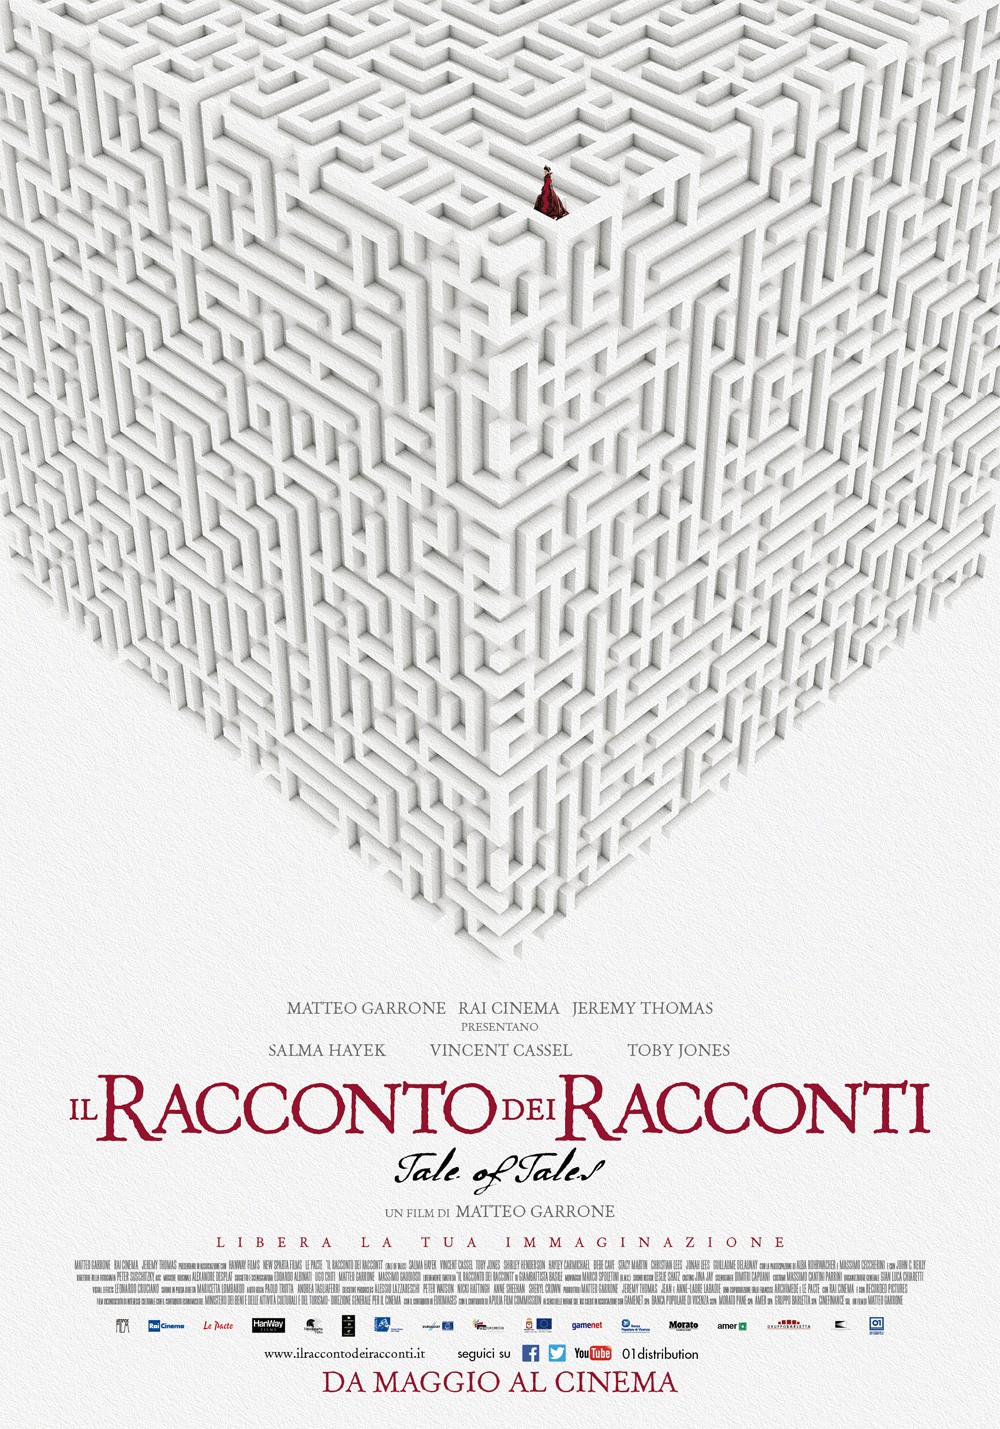 Extra Large Movie Poster Image for Il racconto dei racconti (#3 of 11)